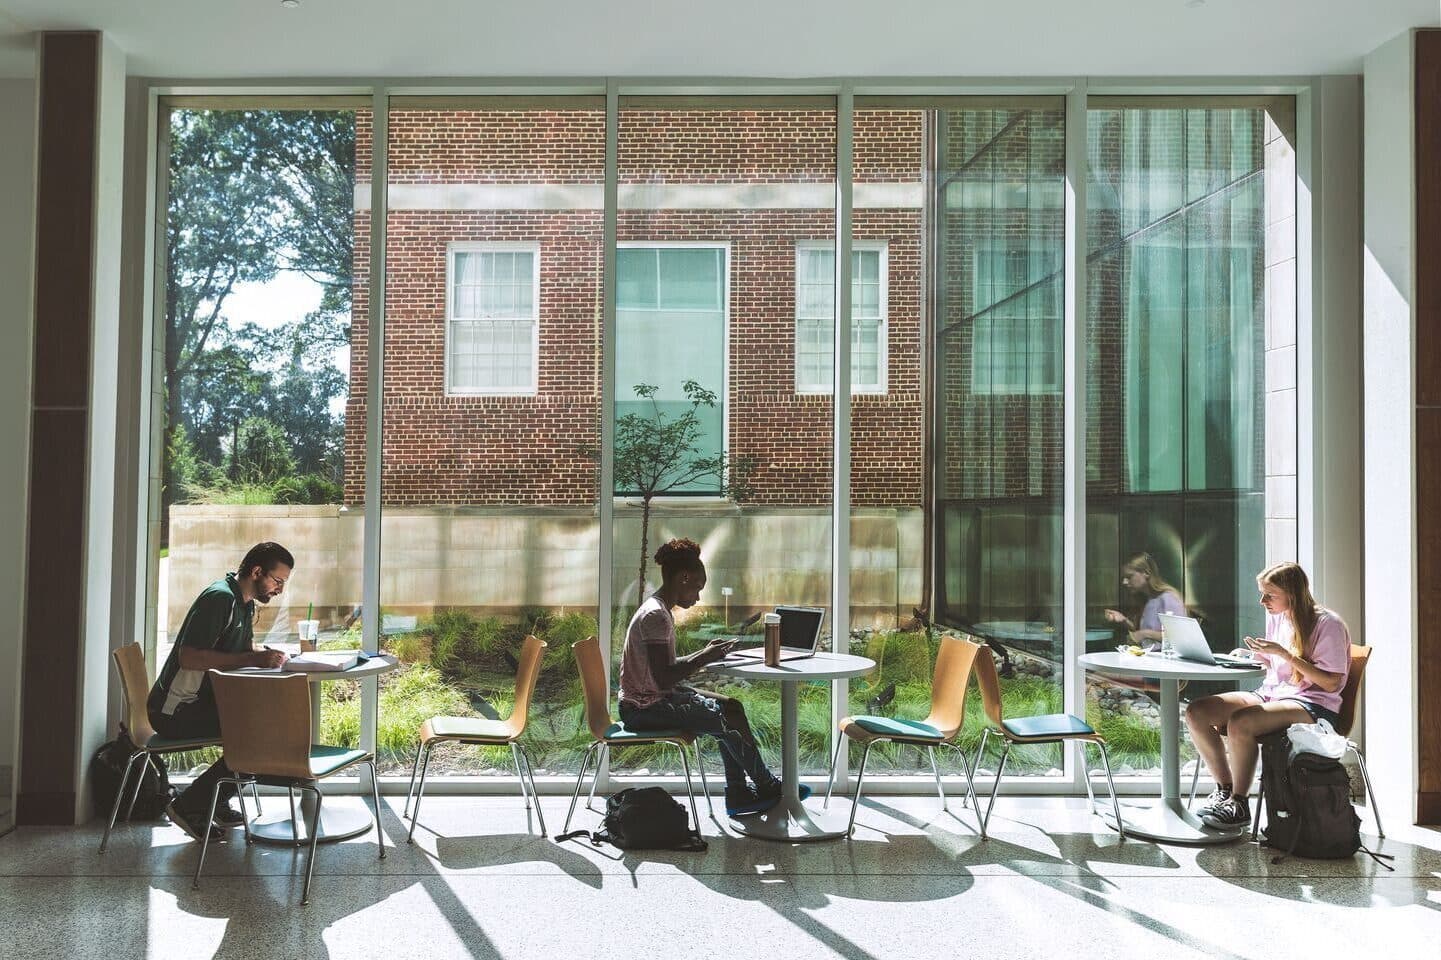 Students studying at tables lit by large windows